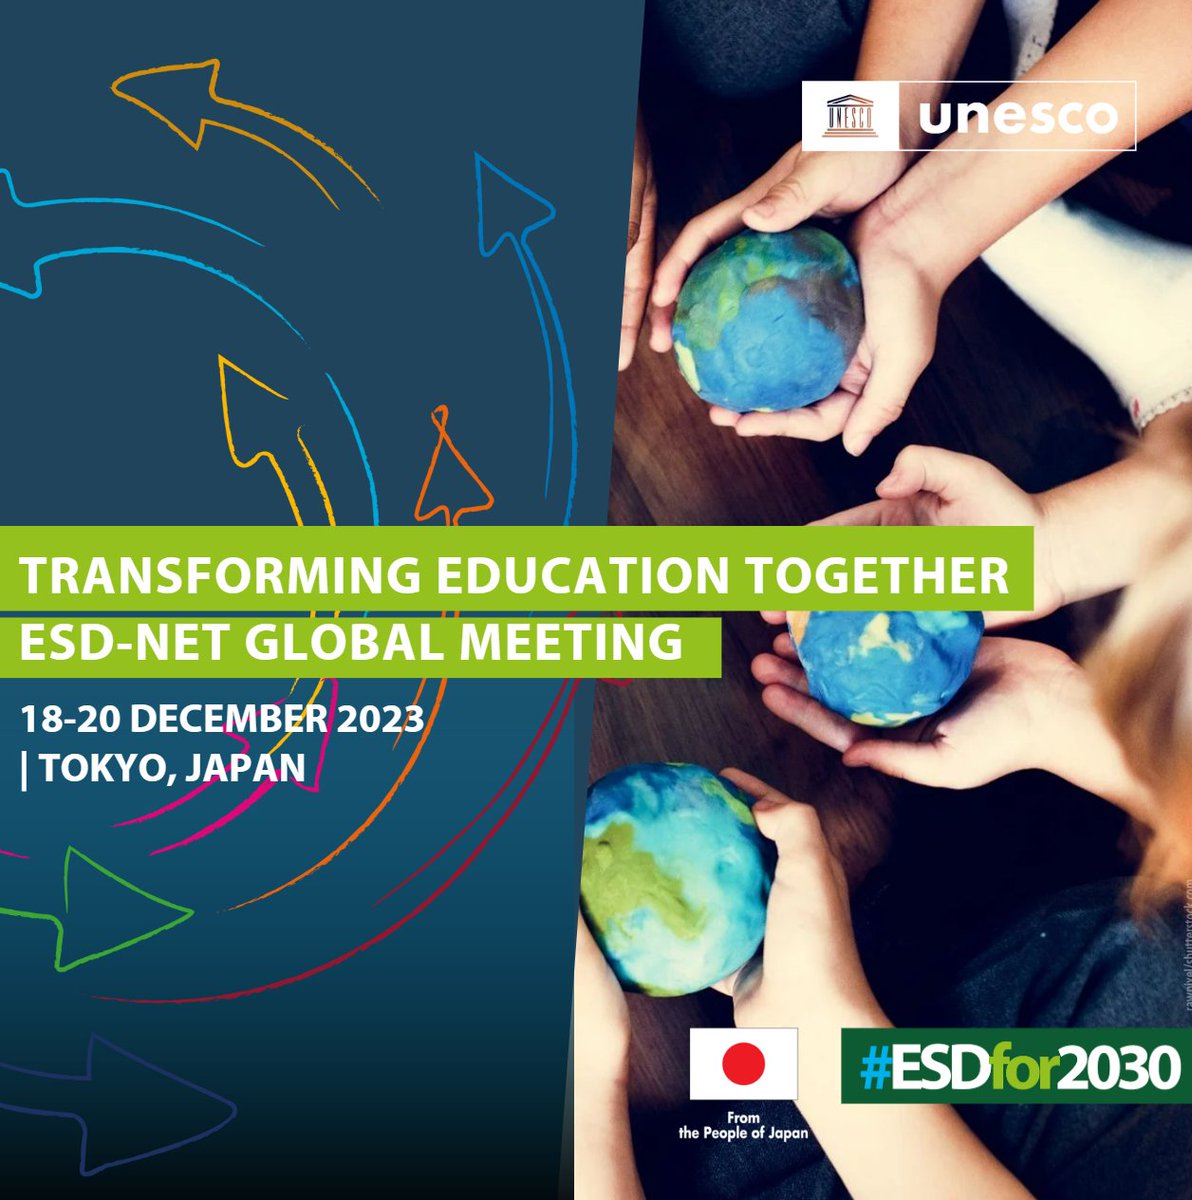 Let’s spotlight sustainable action in education! I am in Tokyo on 18-20 December for the ESD-Net Global Meeting to discuss my contribution to ESD! Join me in #TransformingEducationTogether! #GreeningEducation #ClimateAction #LearnForOurPlanet #YorkuSDGs #Sustainability4Ed